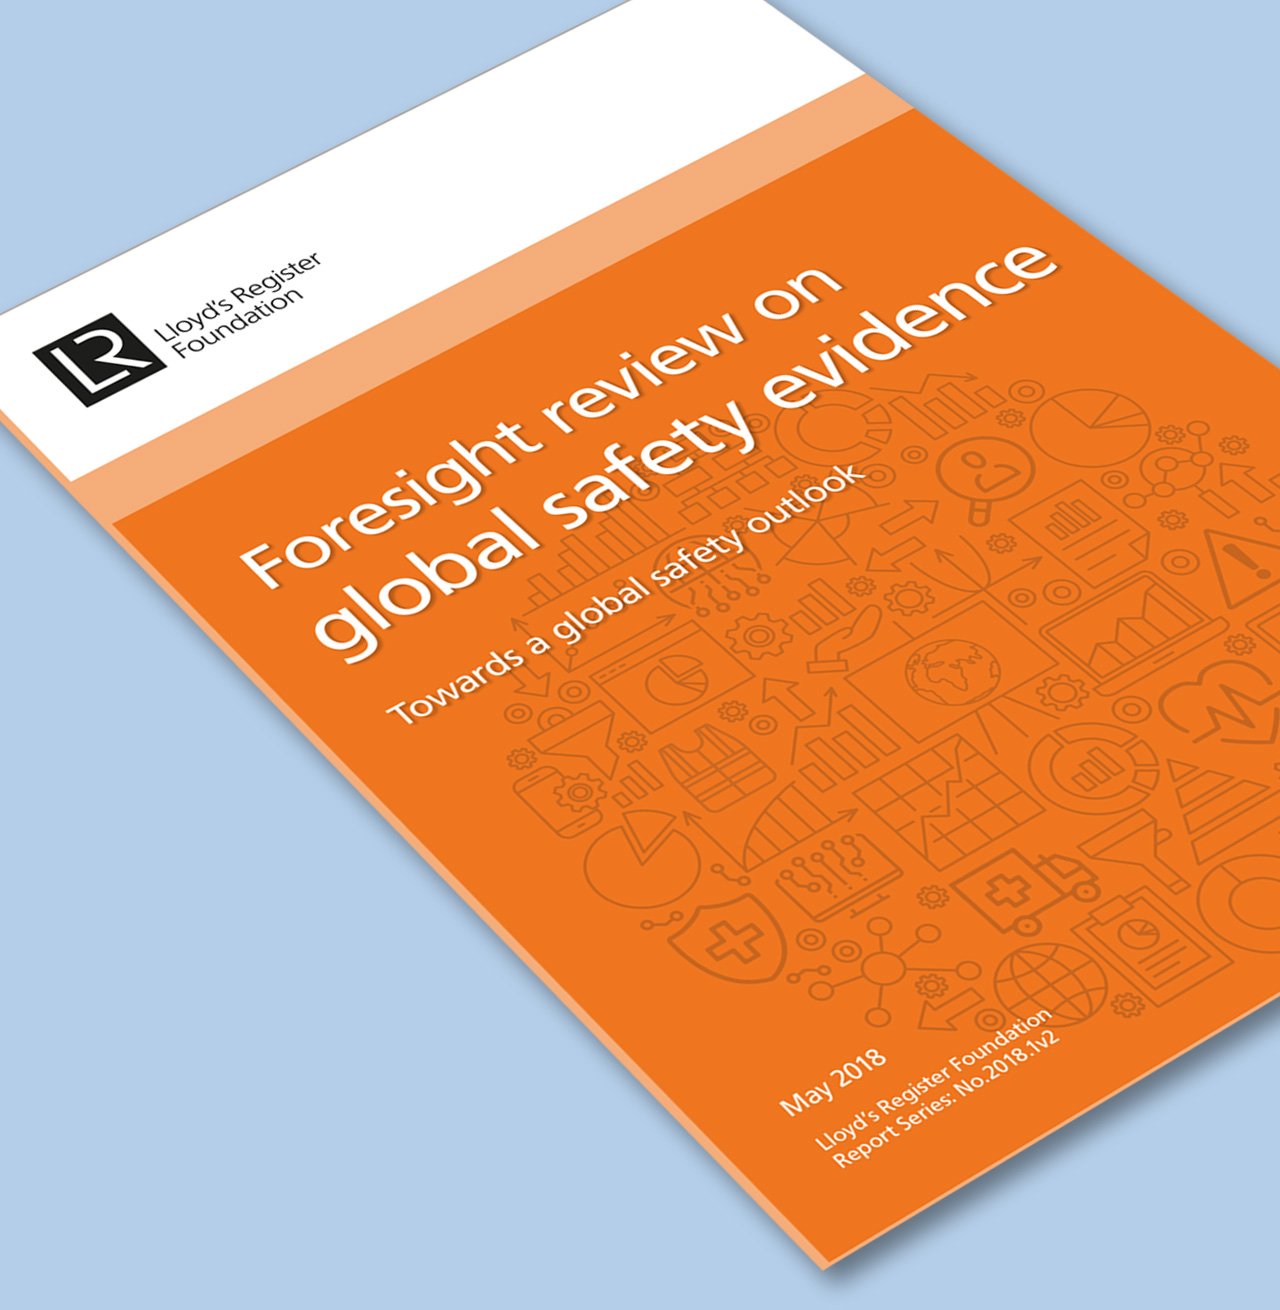 Foresight review on global safety evidence cover